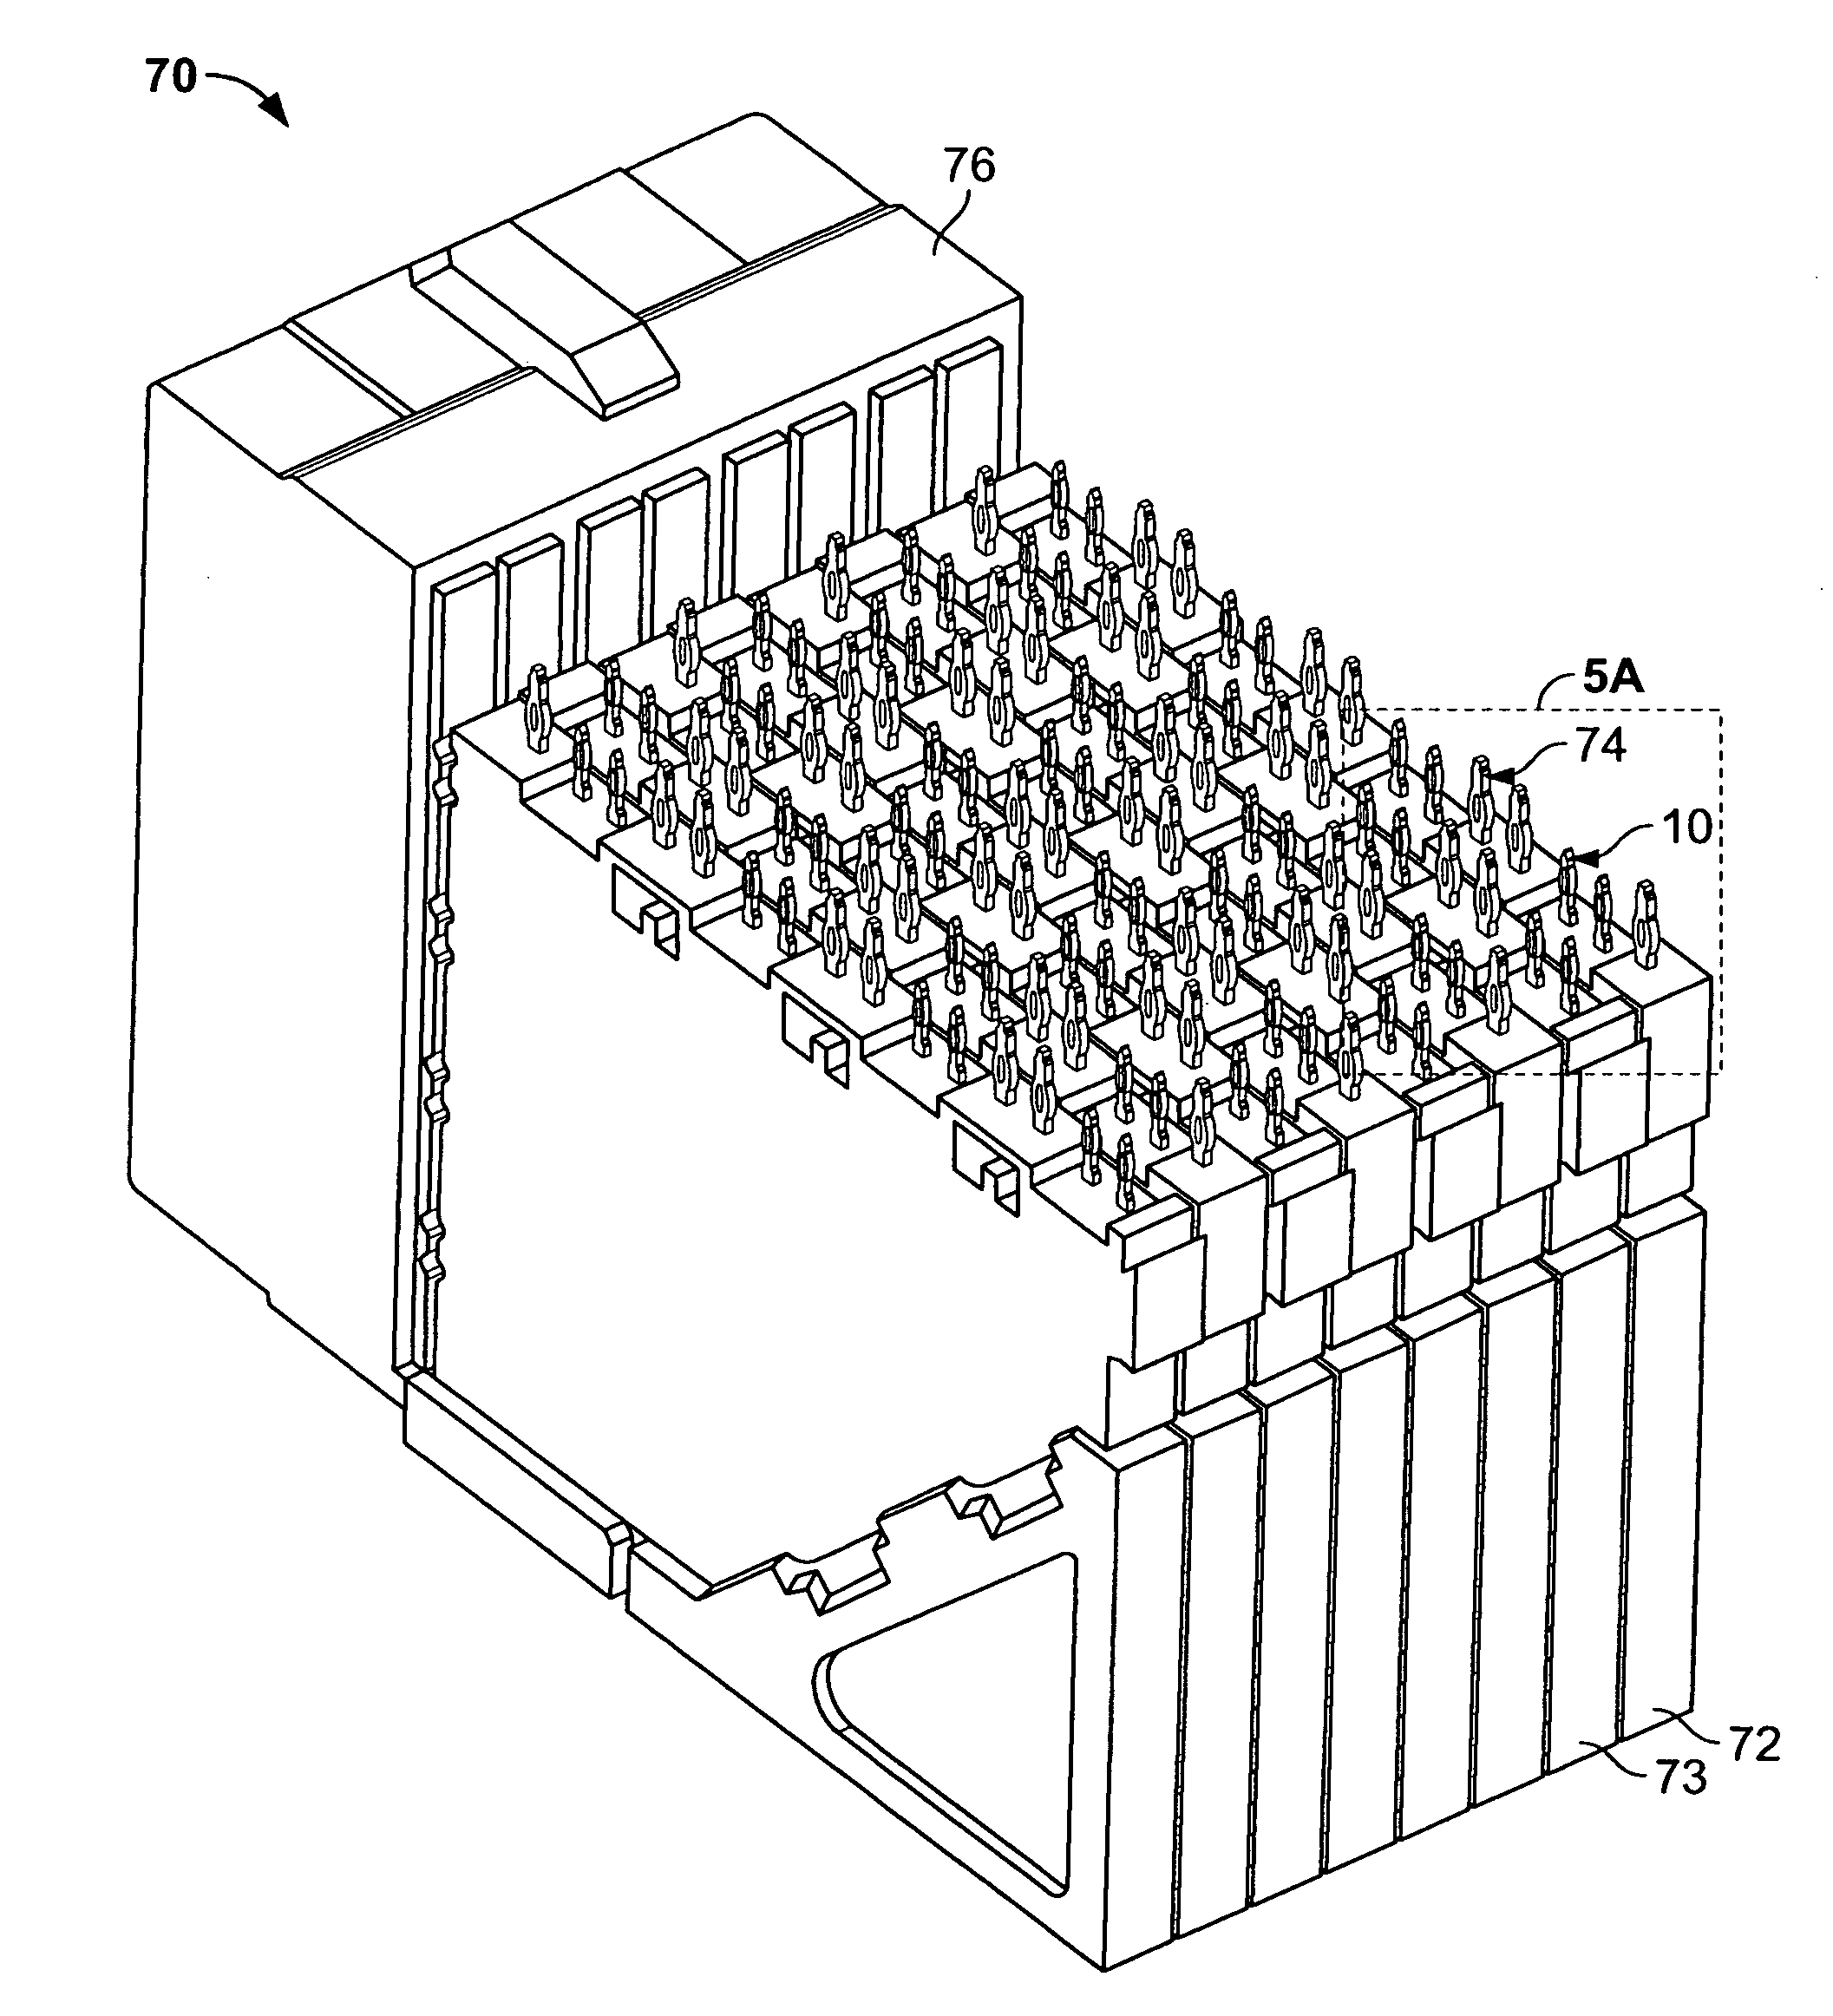 Electrical connector having improved terminal configuration